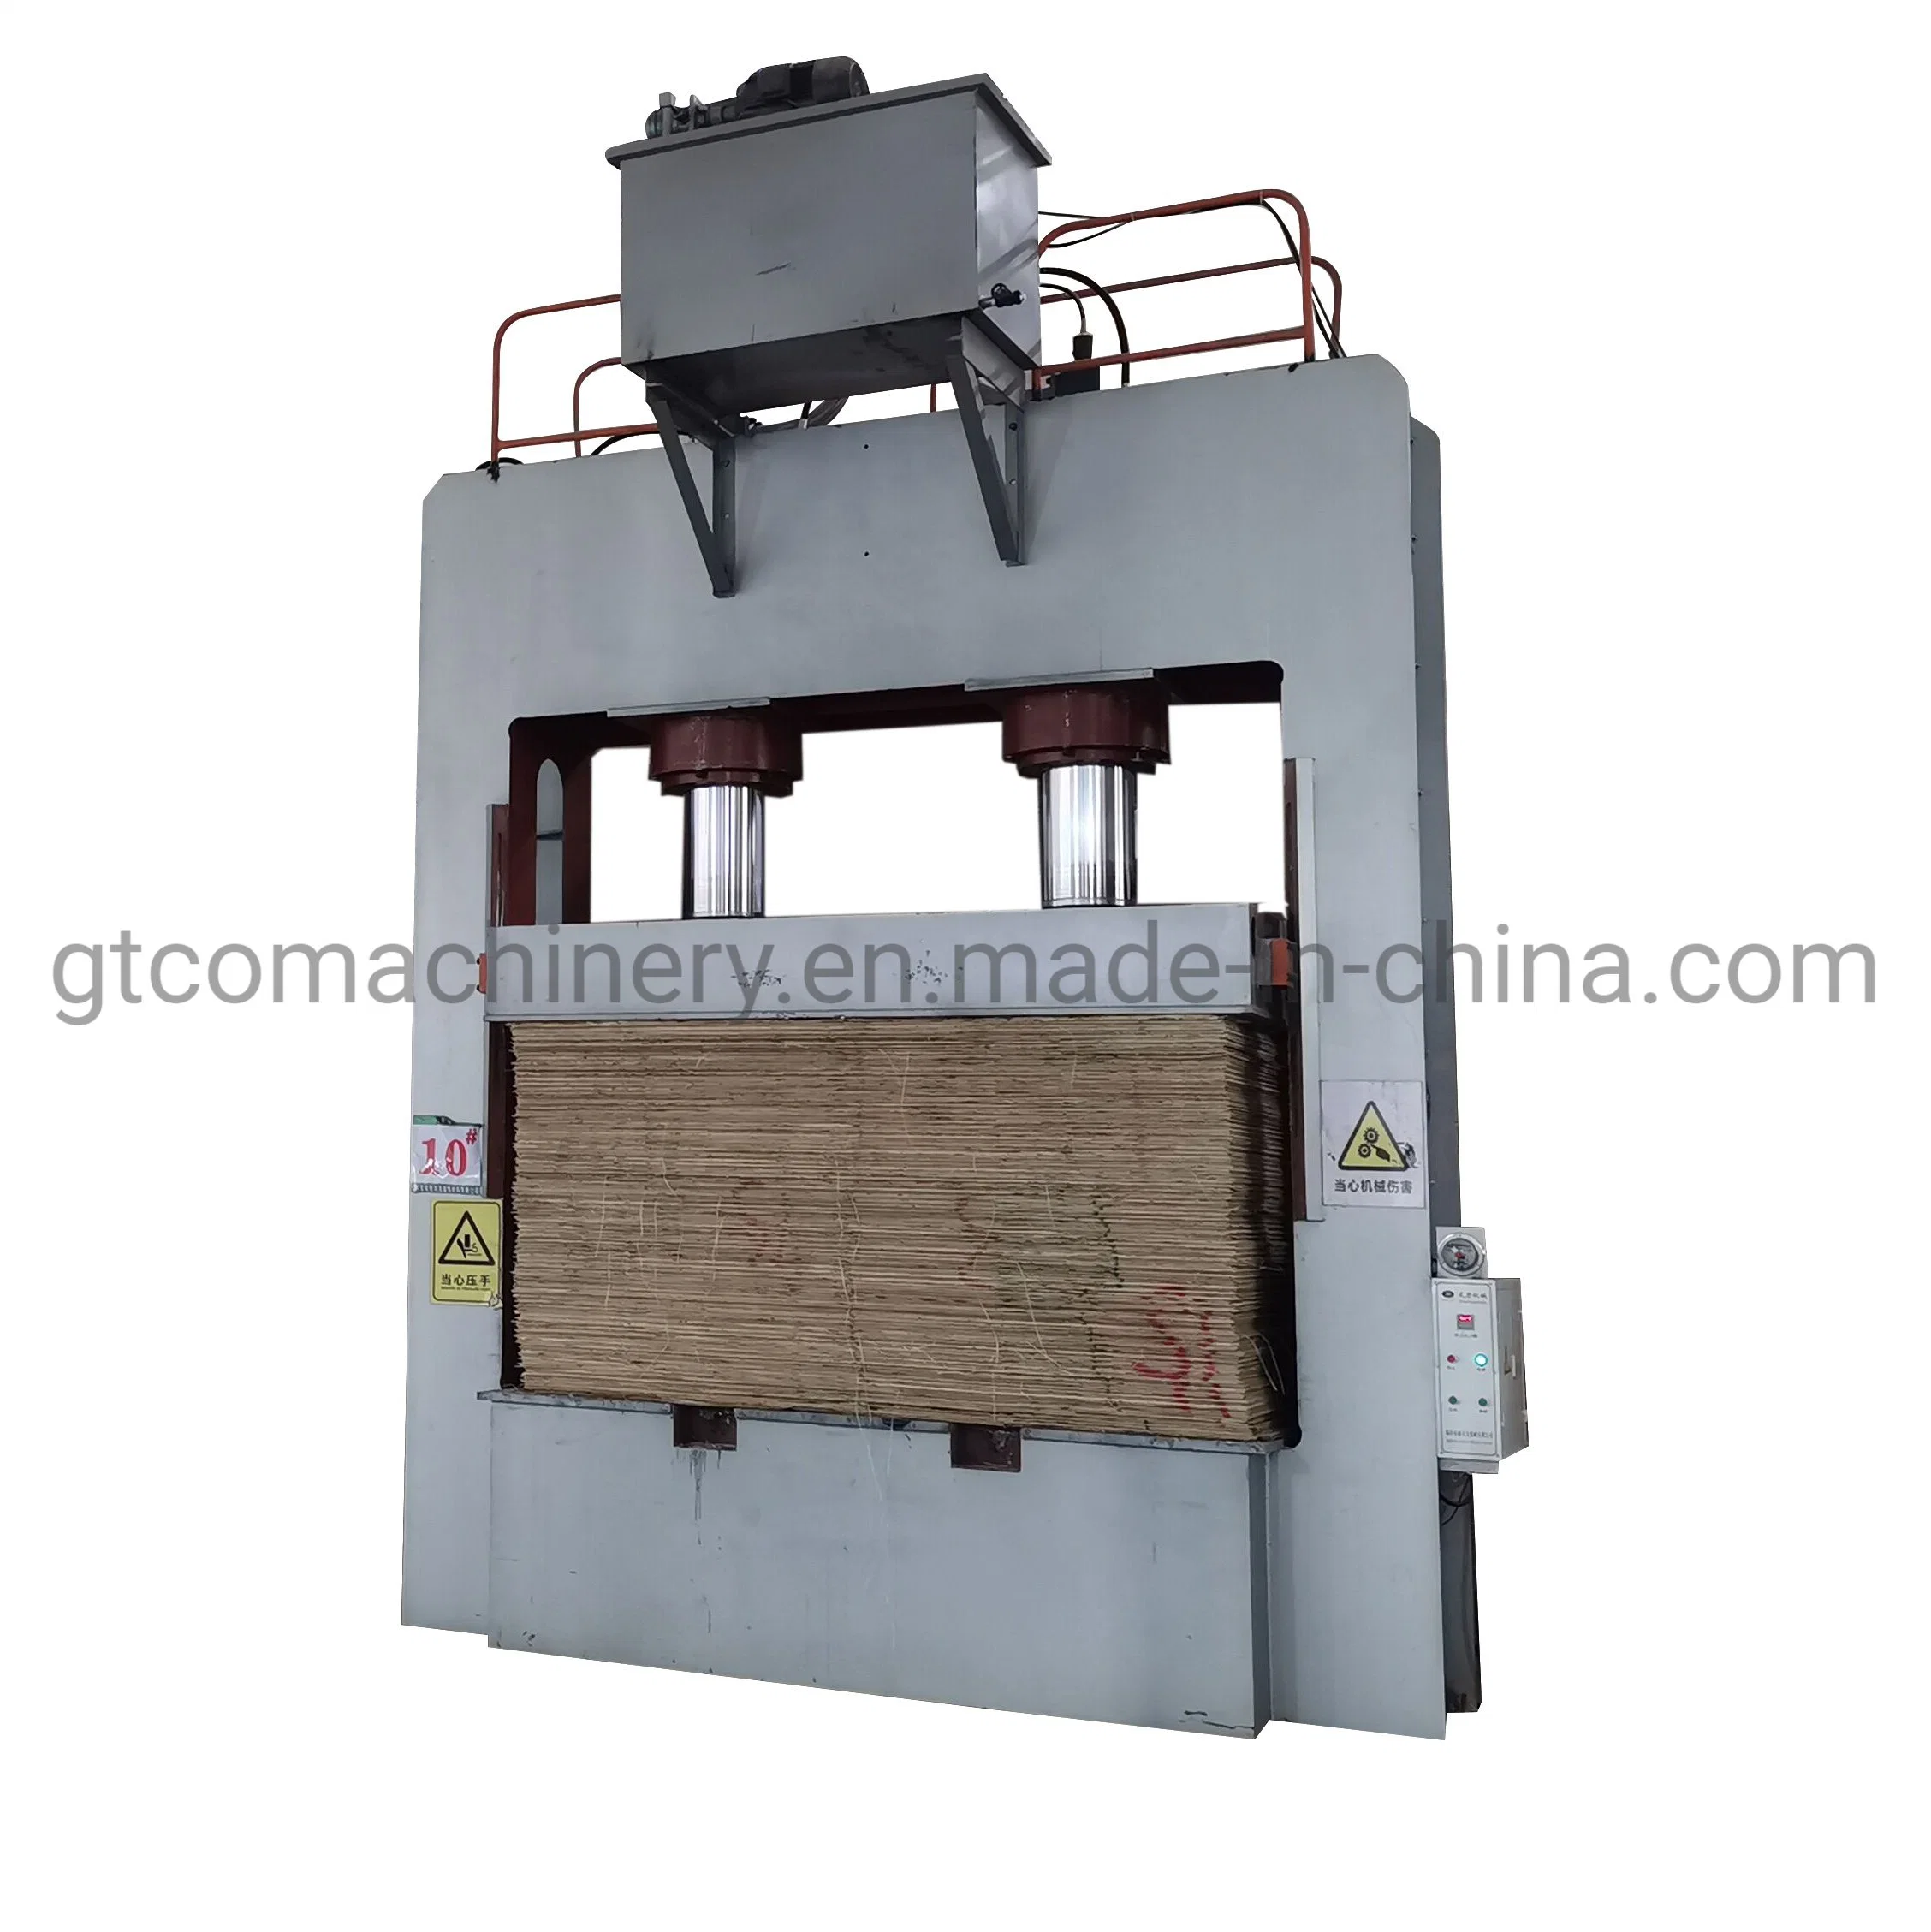 Woodworking Hydraulic Cold Press Machine with Oil Cylinders